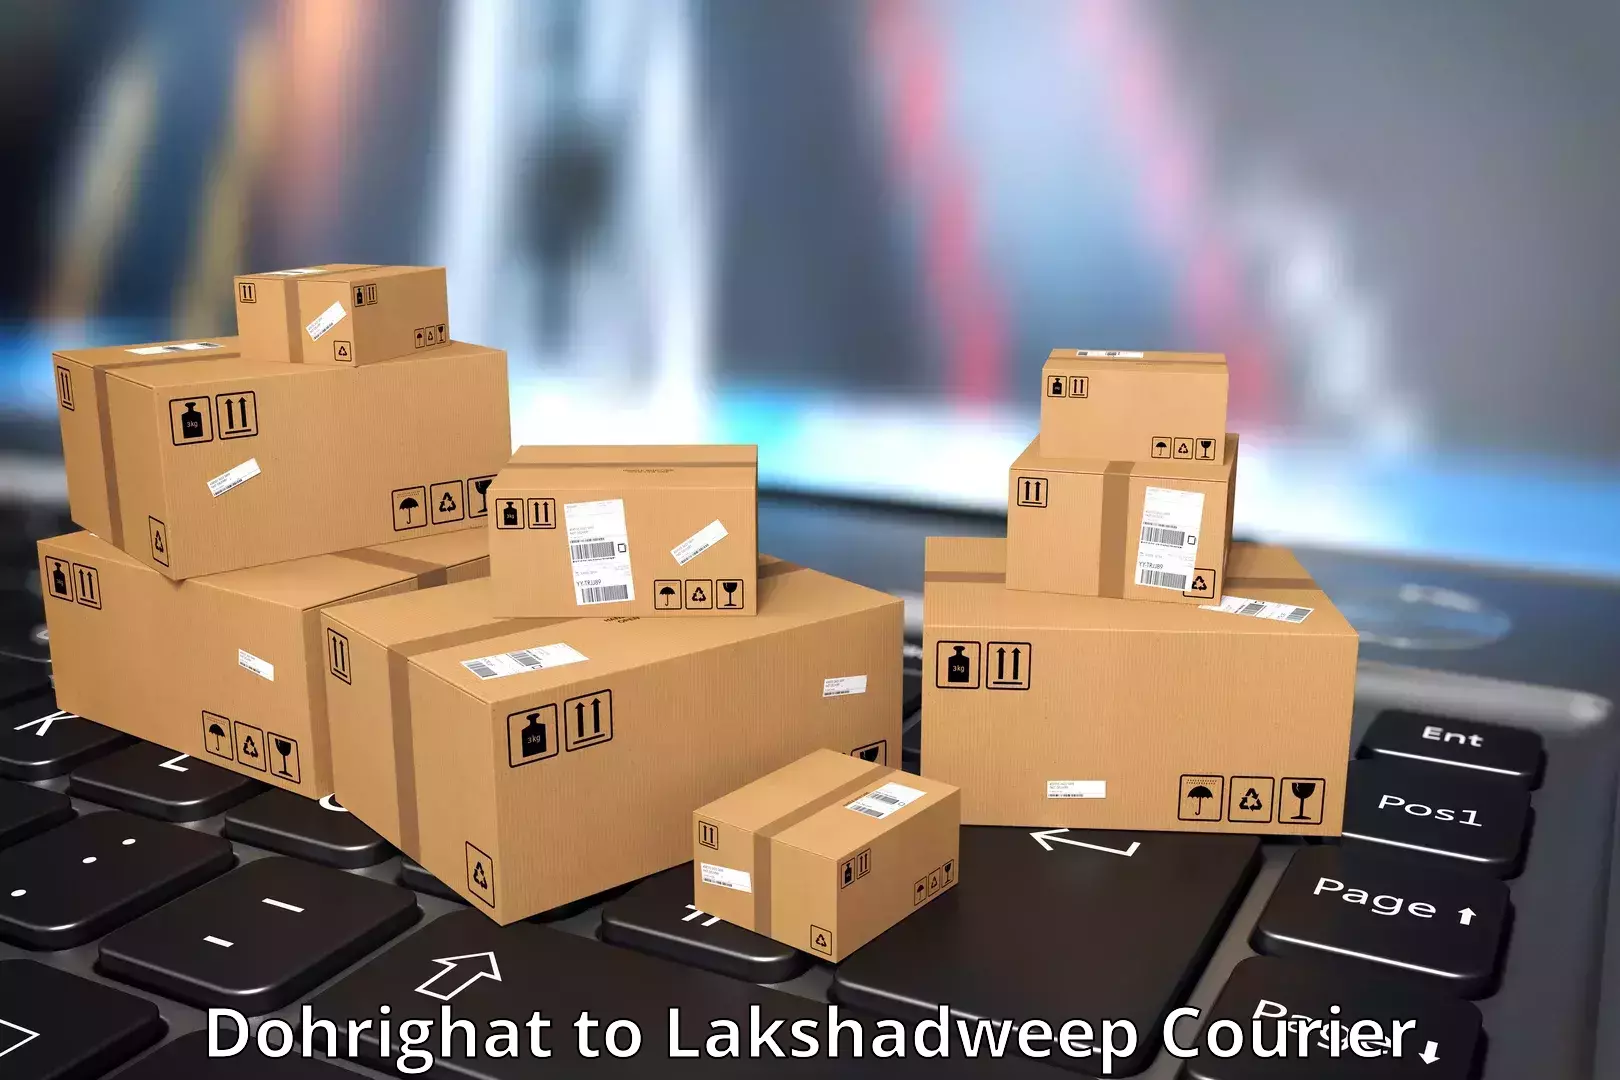 24/7 courier service Dohrighat to Lakshadweep